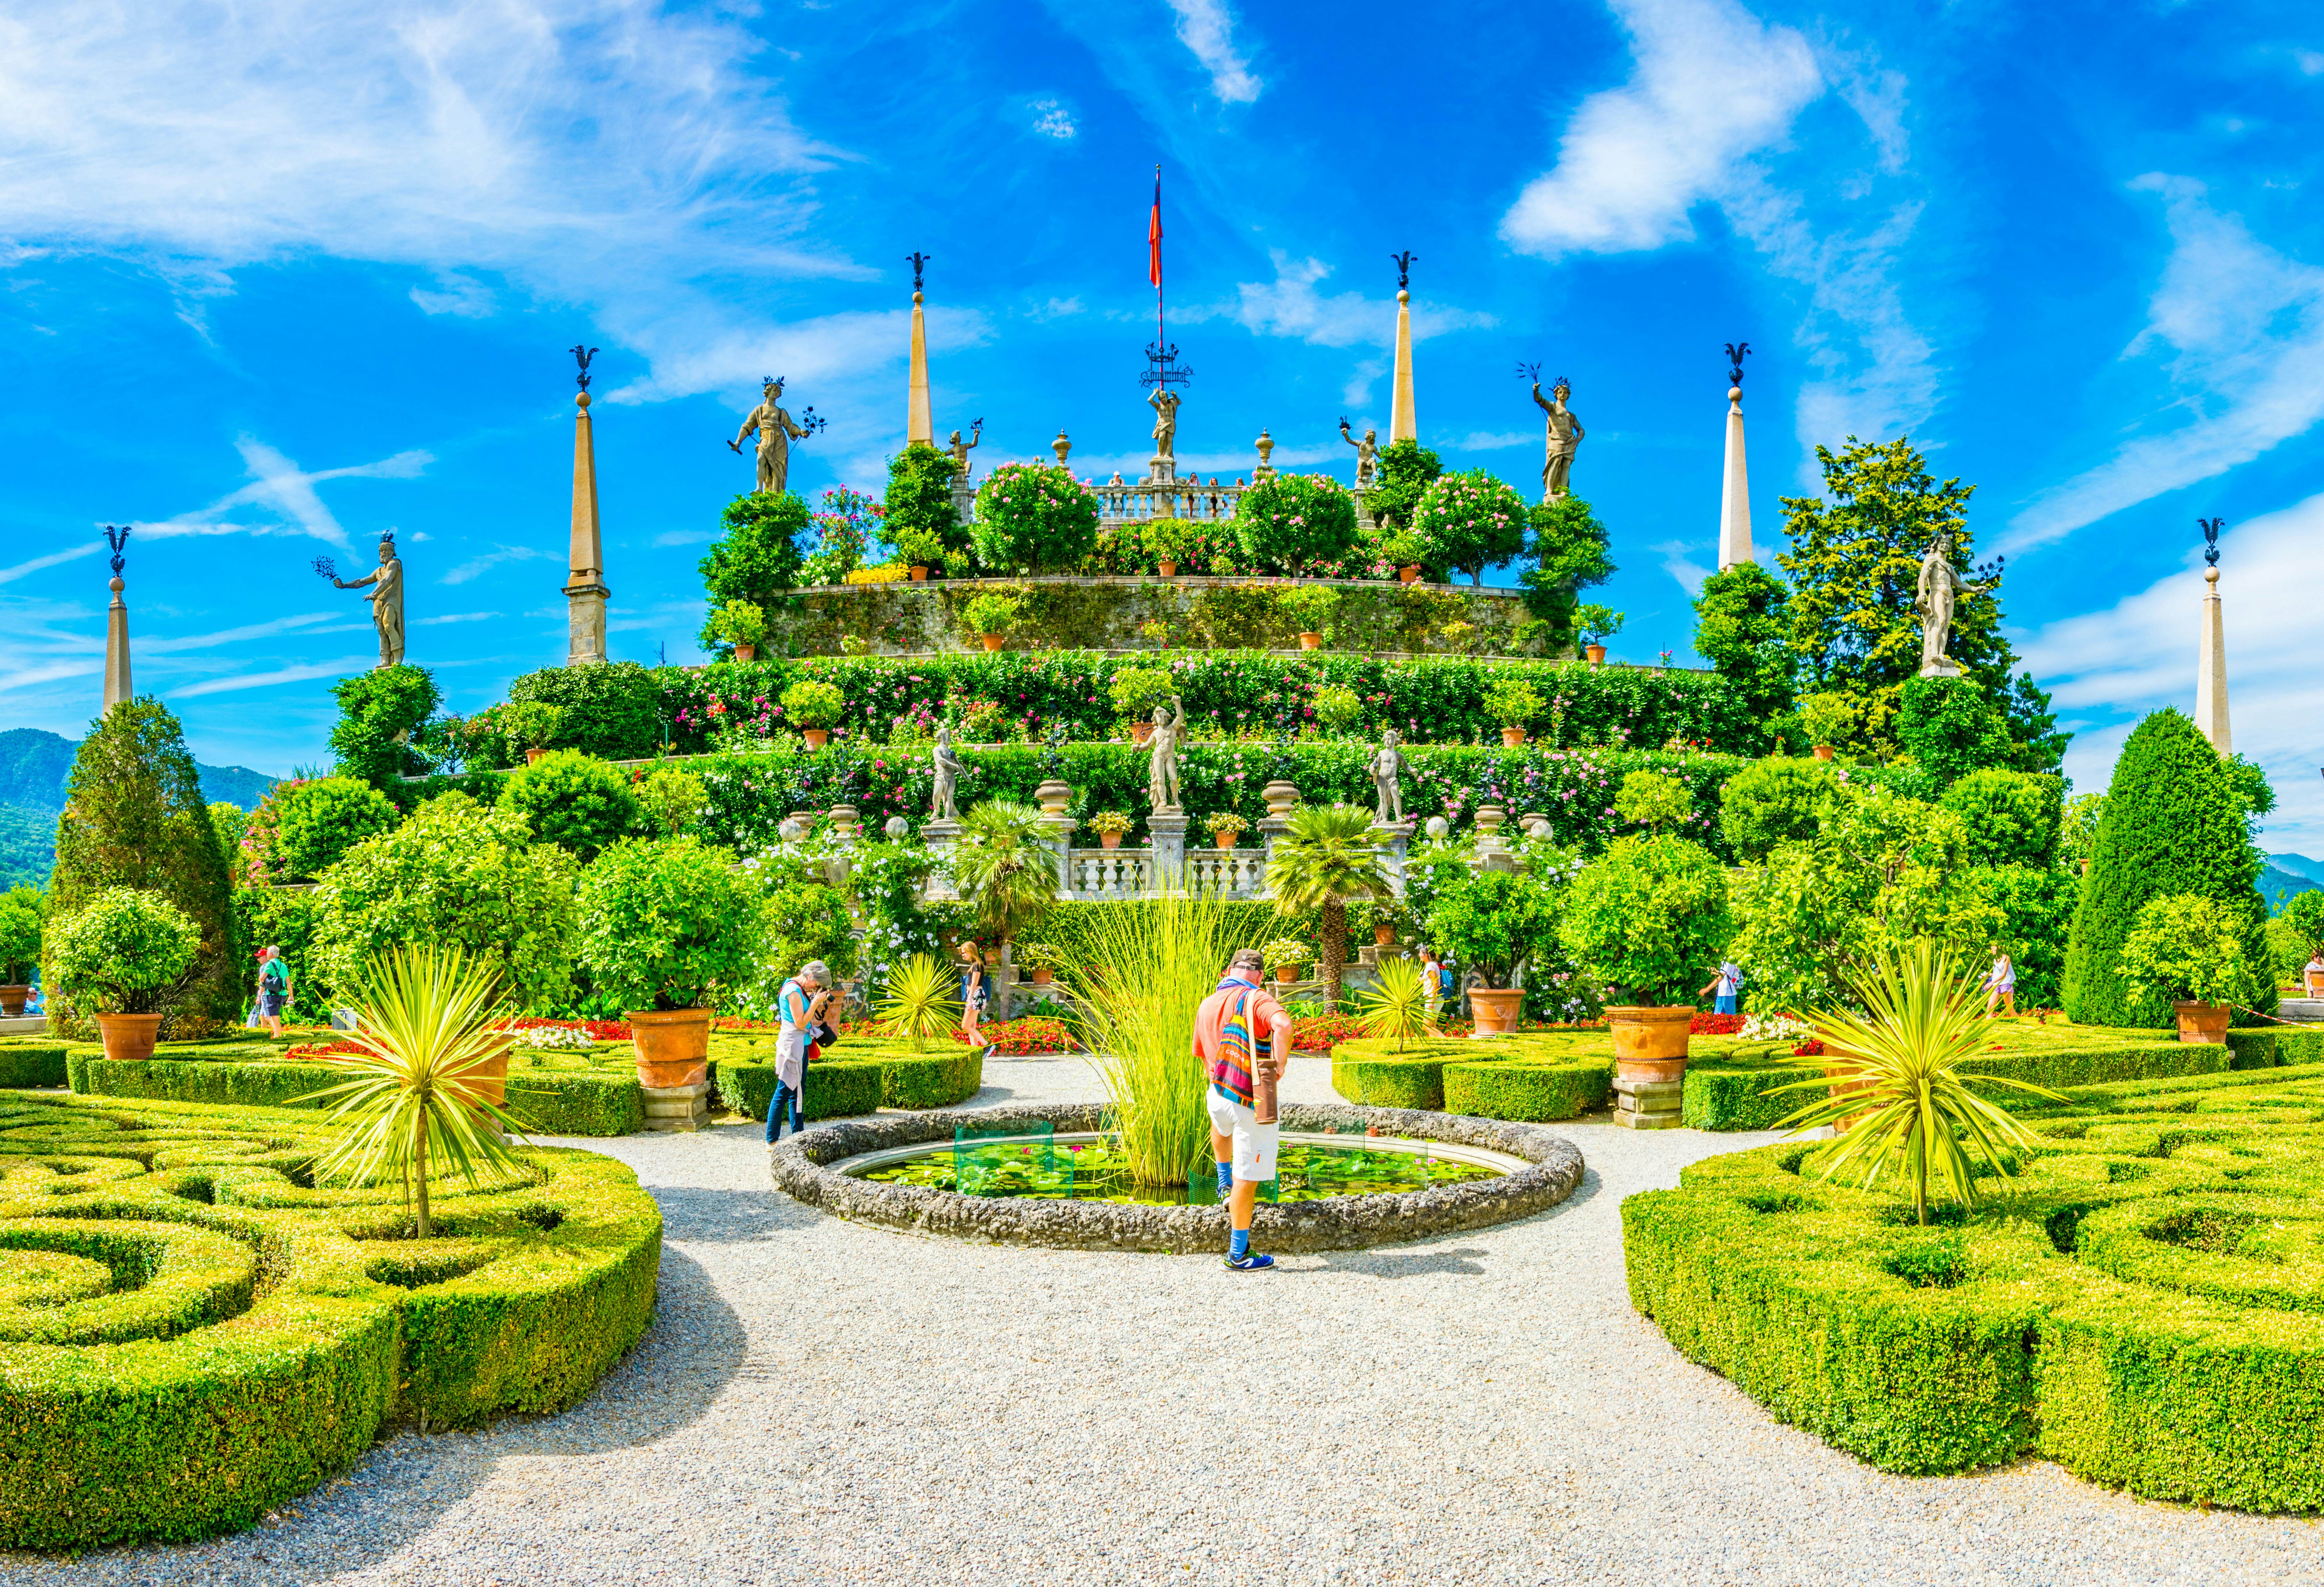 9 of the best botanical gardens in the world to visit in 2022 - Lonely Planet